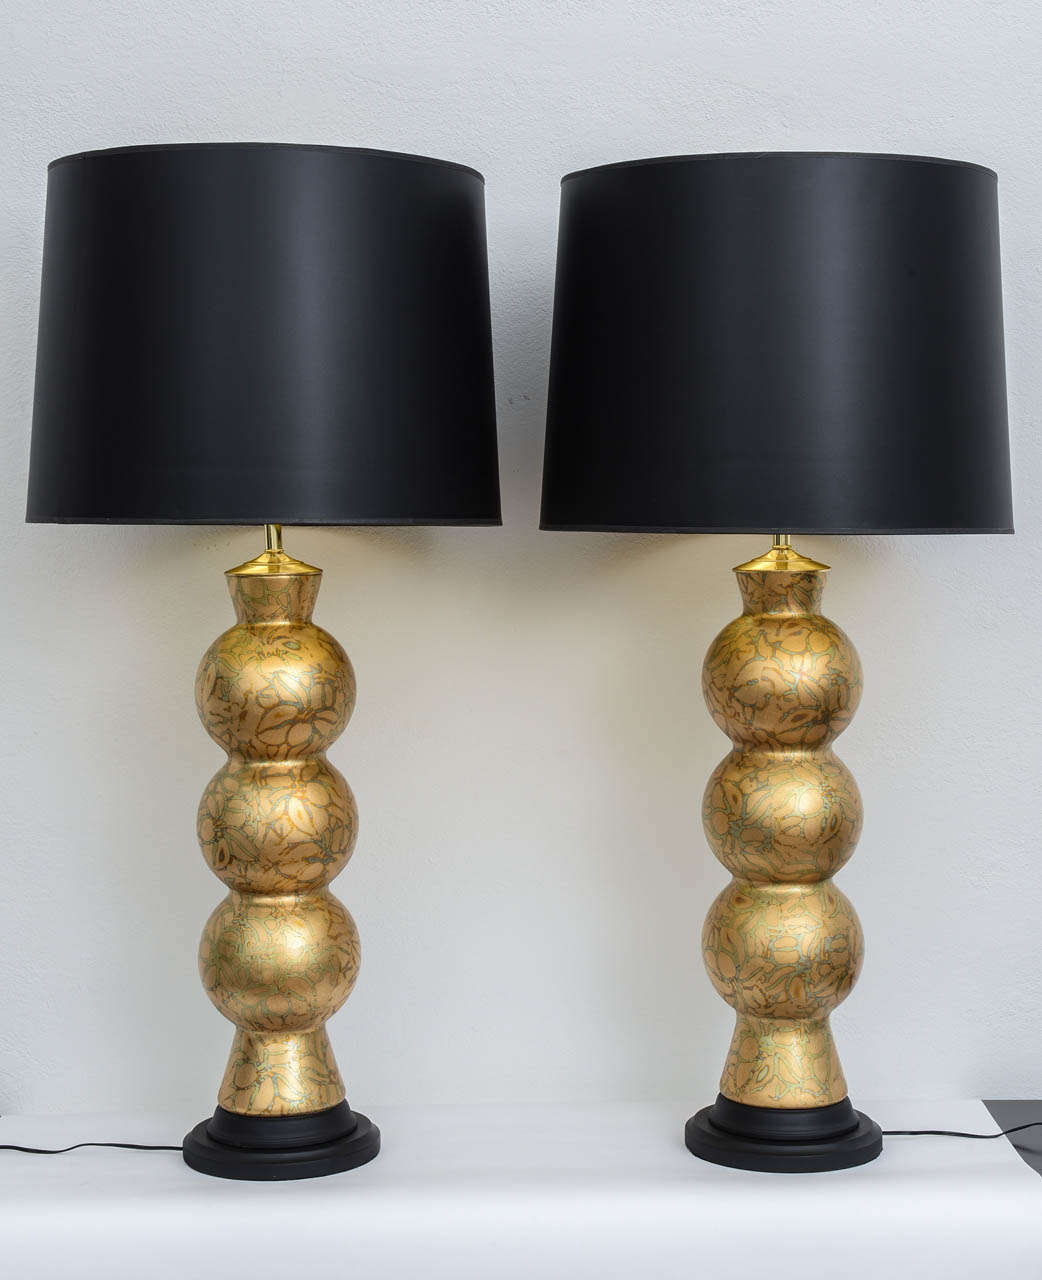 Pair of stacked glass globe lamps covered entirely with hand placed variegated gold leaf. The matte black wood bases match the matte black shades. Newly rewired and sold as a pair.